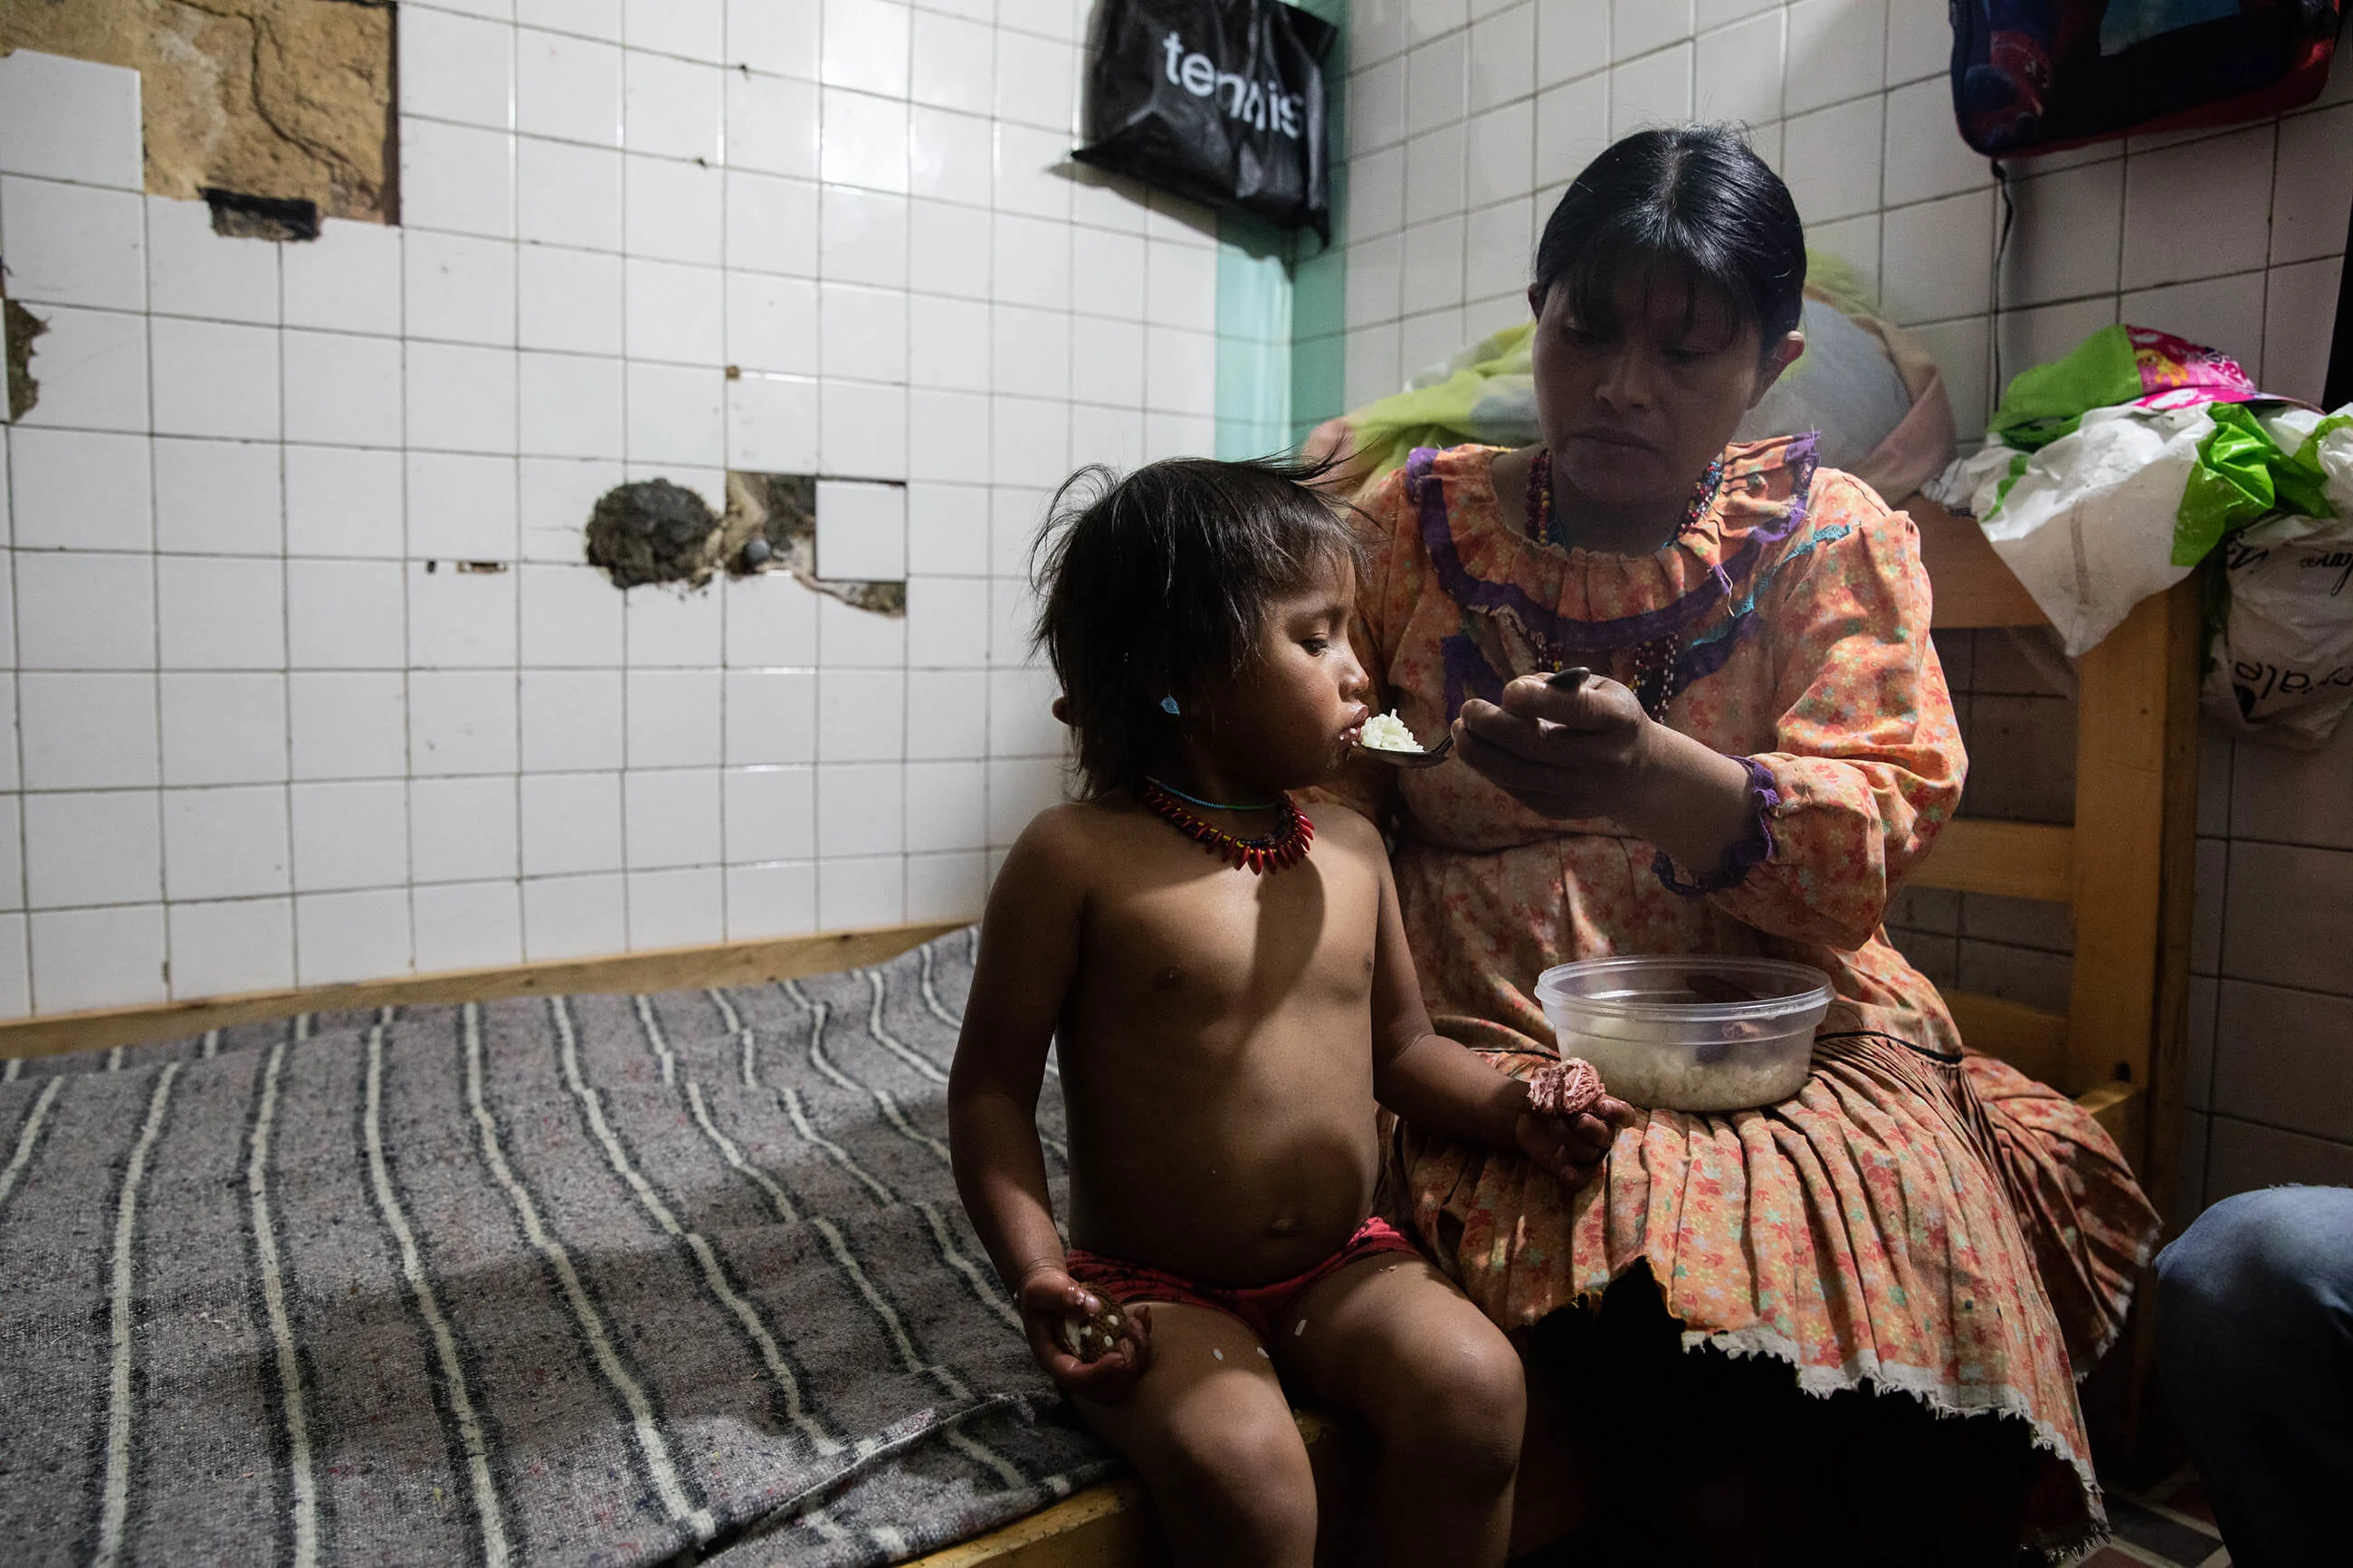 A displaced mother feeds her baby in a meat locker converted into a bedroom